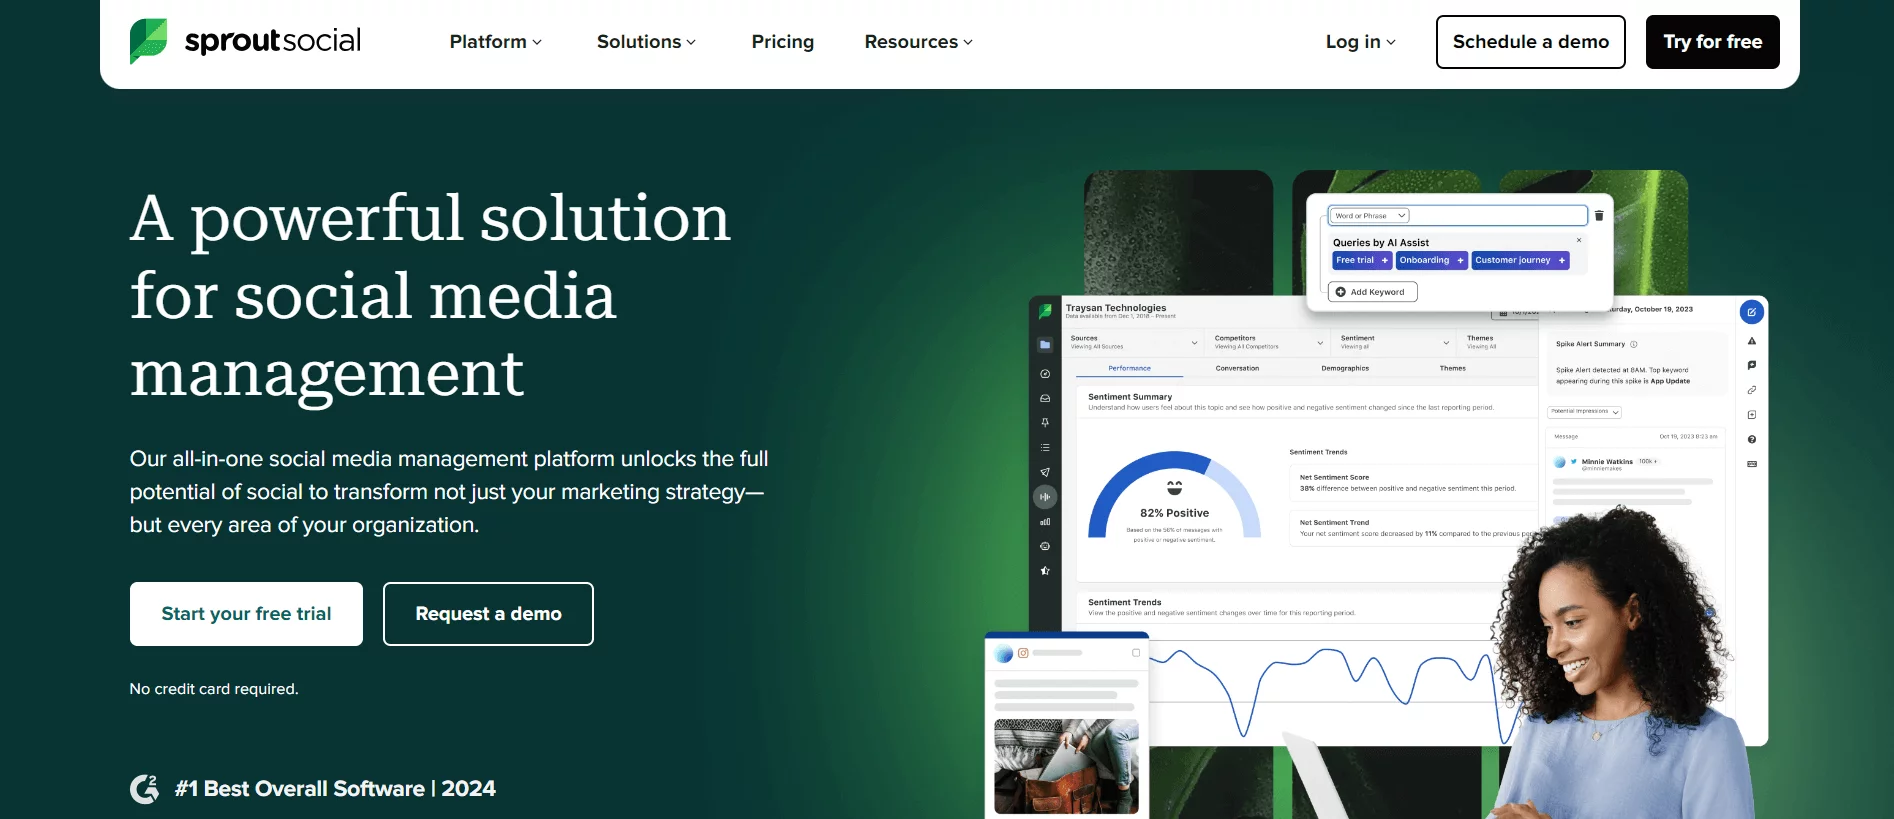 Homepage of the Sprout Social website showcasing their social media management platform with options to start a free trial or request a demo, featuring analytics interface visuals.